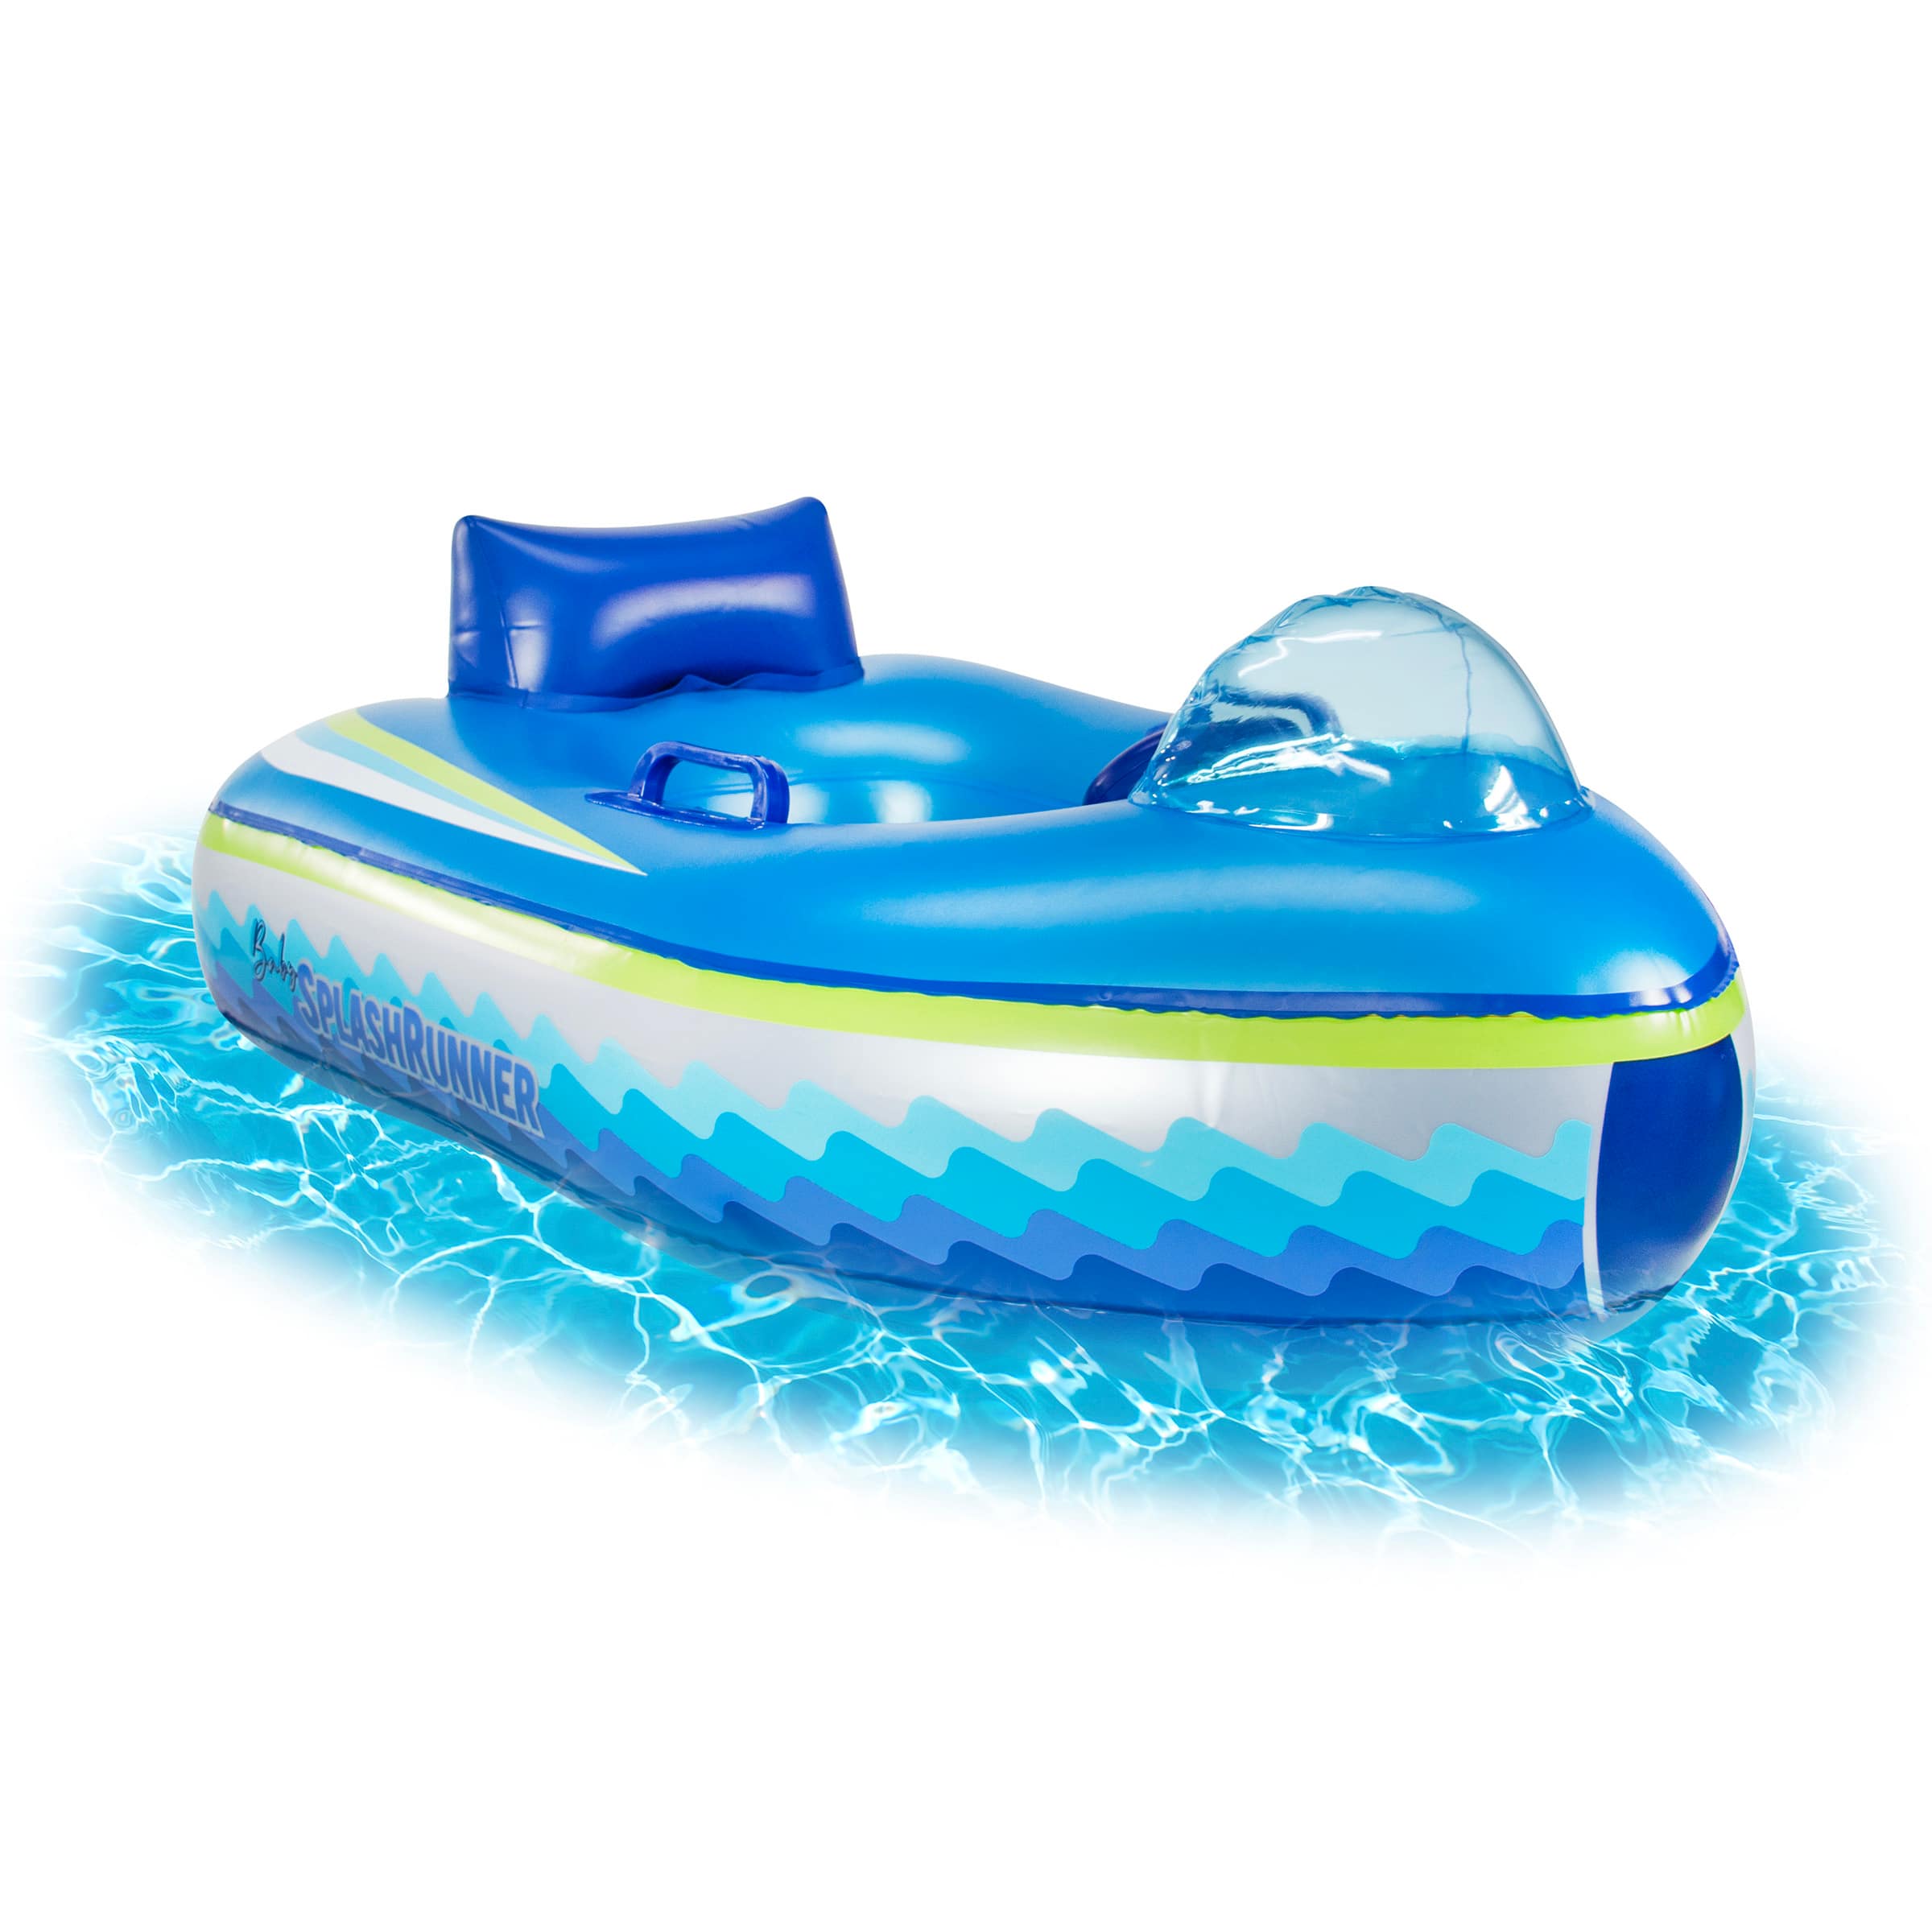 PoolCandy Remote Control Motorized Baby Runner Toy Boat